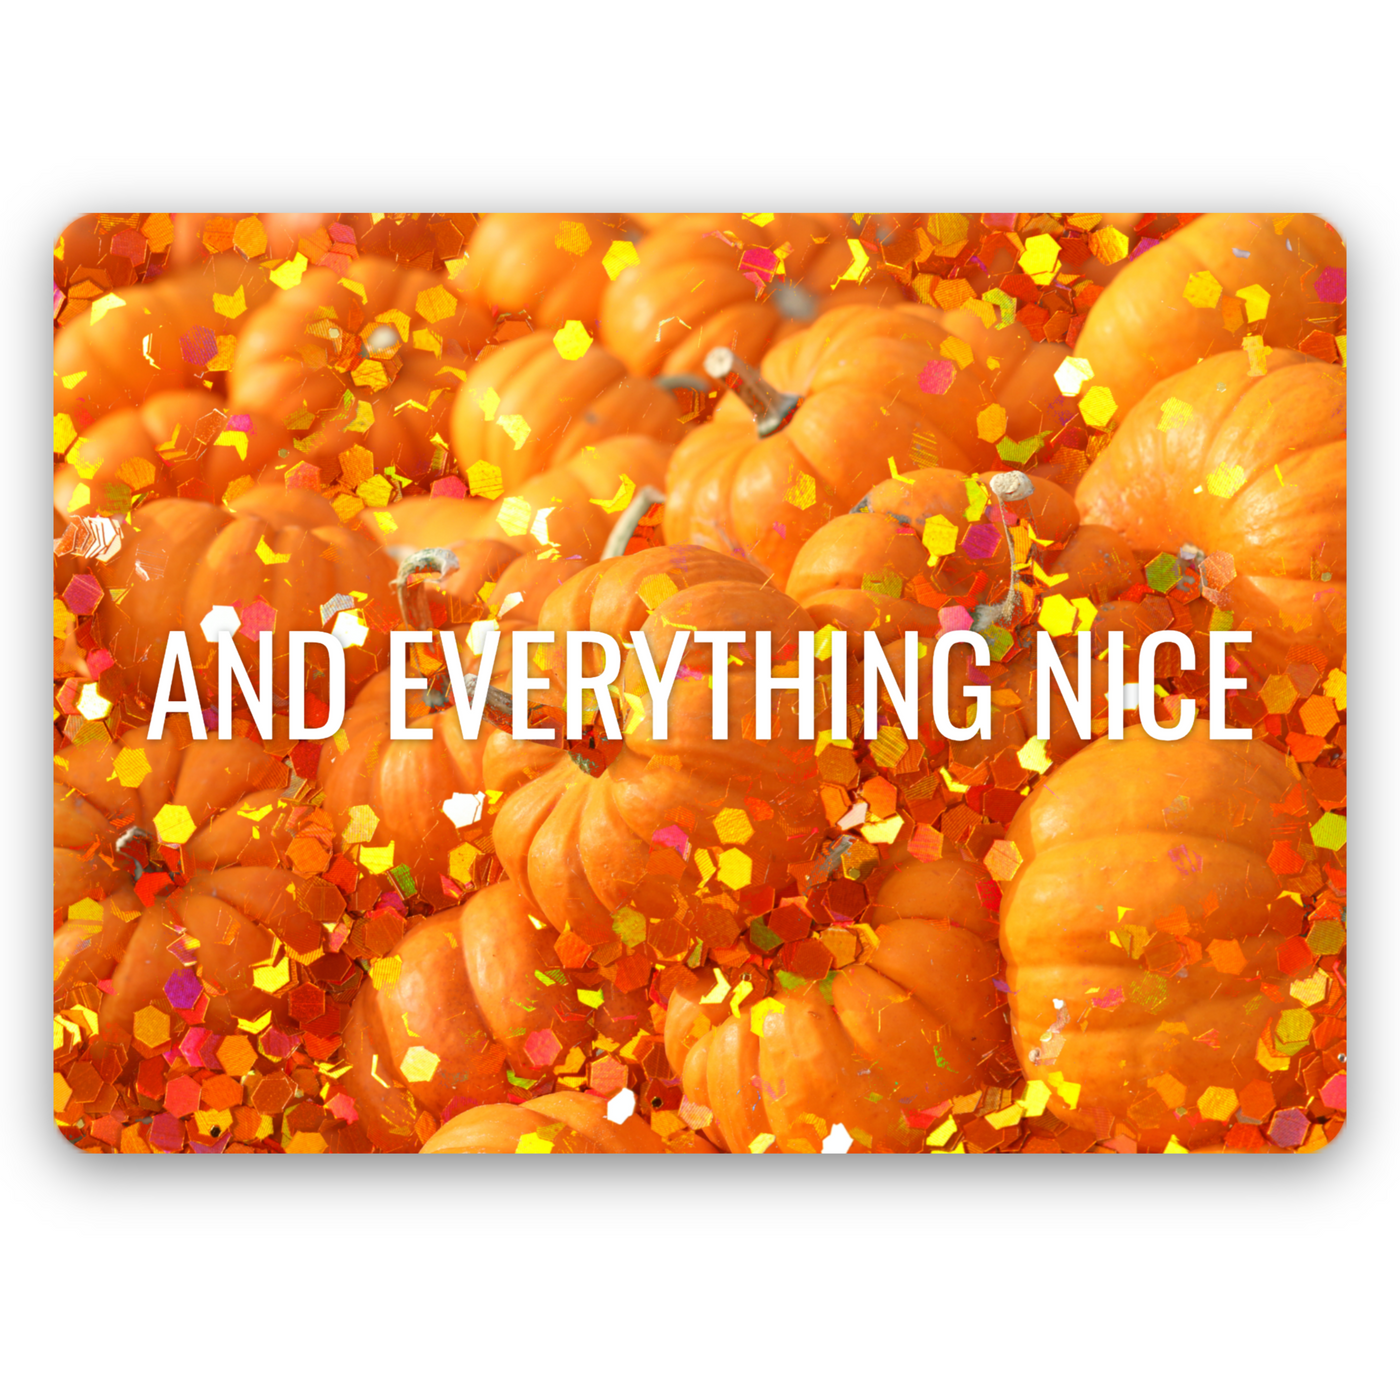 And Everything Nice Cutting Board